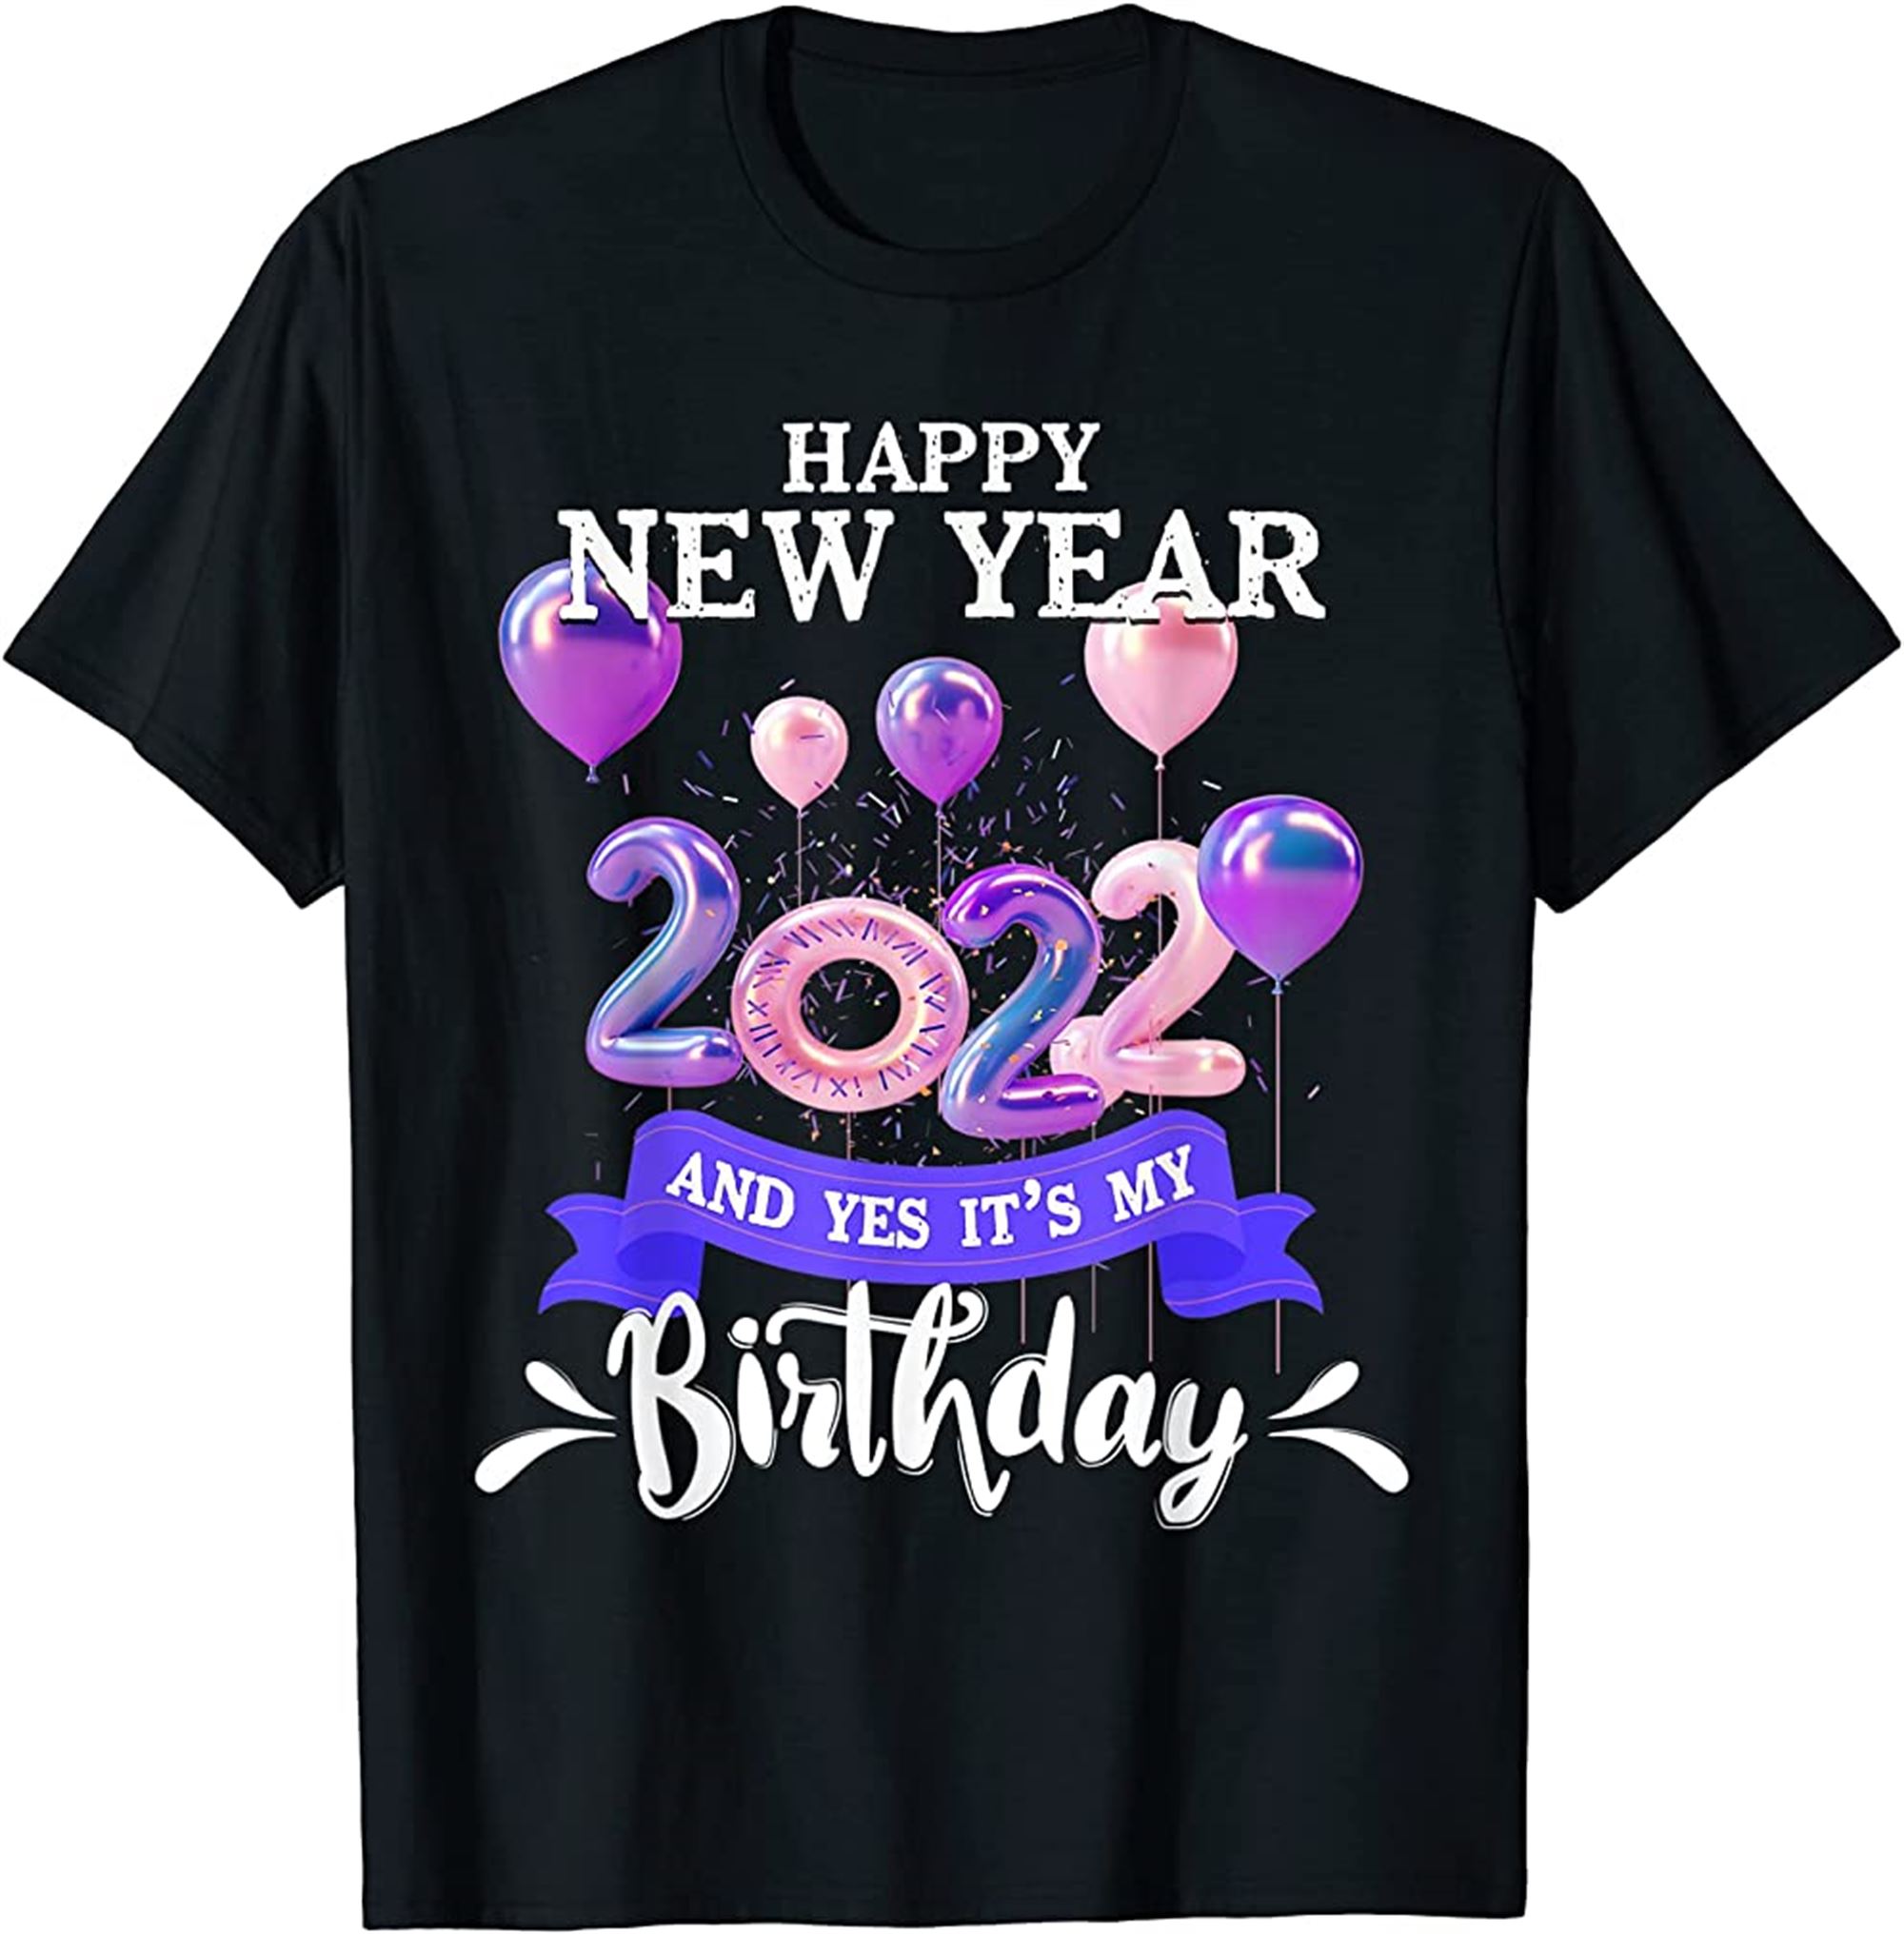 Happy New Year And Yes Its My Birthday January 1st Bday T-shirt Size Up To 5xl